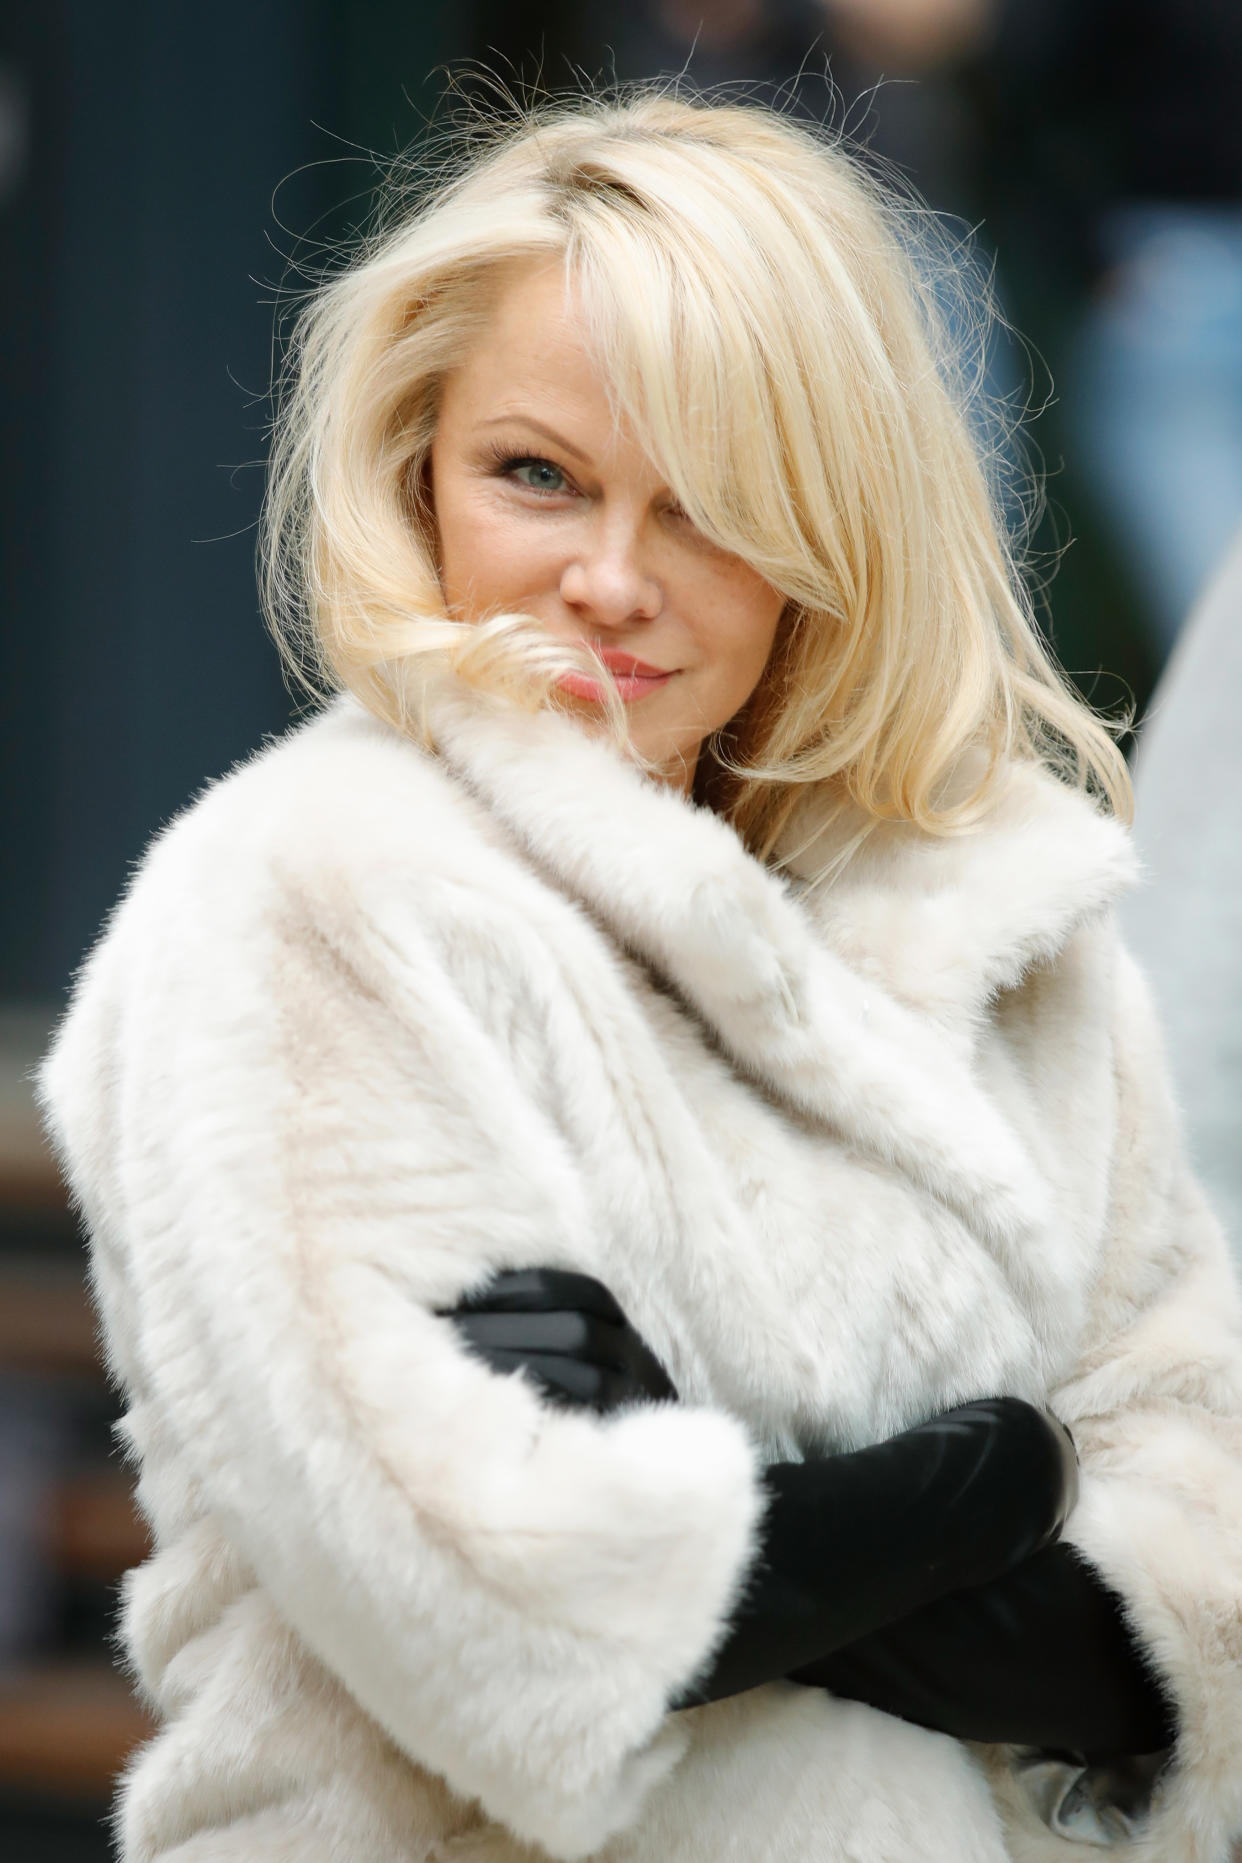 Pamela Anderson wearing faux fur in Germany. <i>(Getty Images)</i>